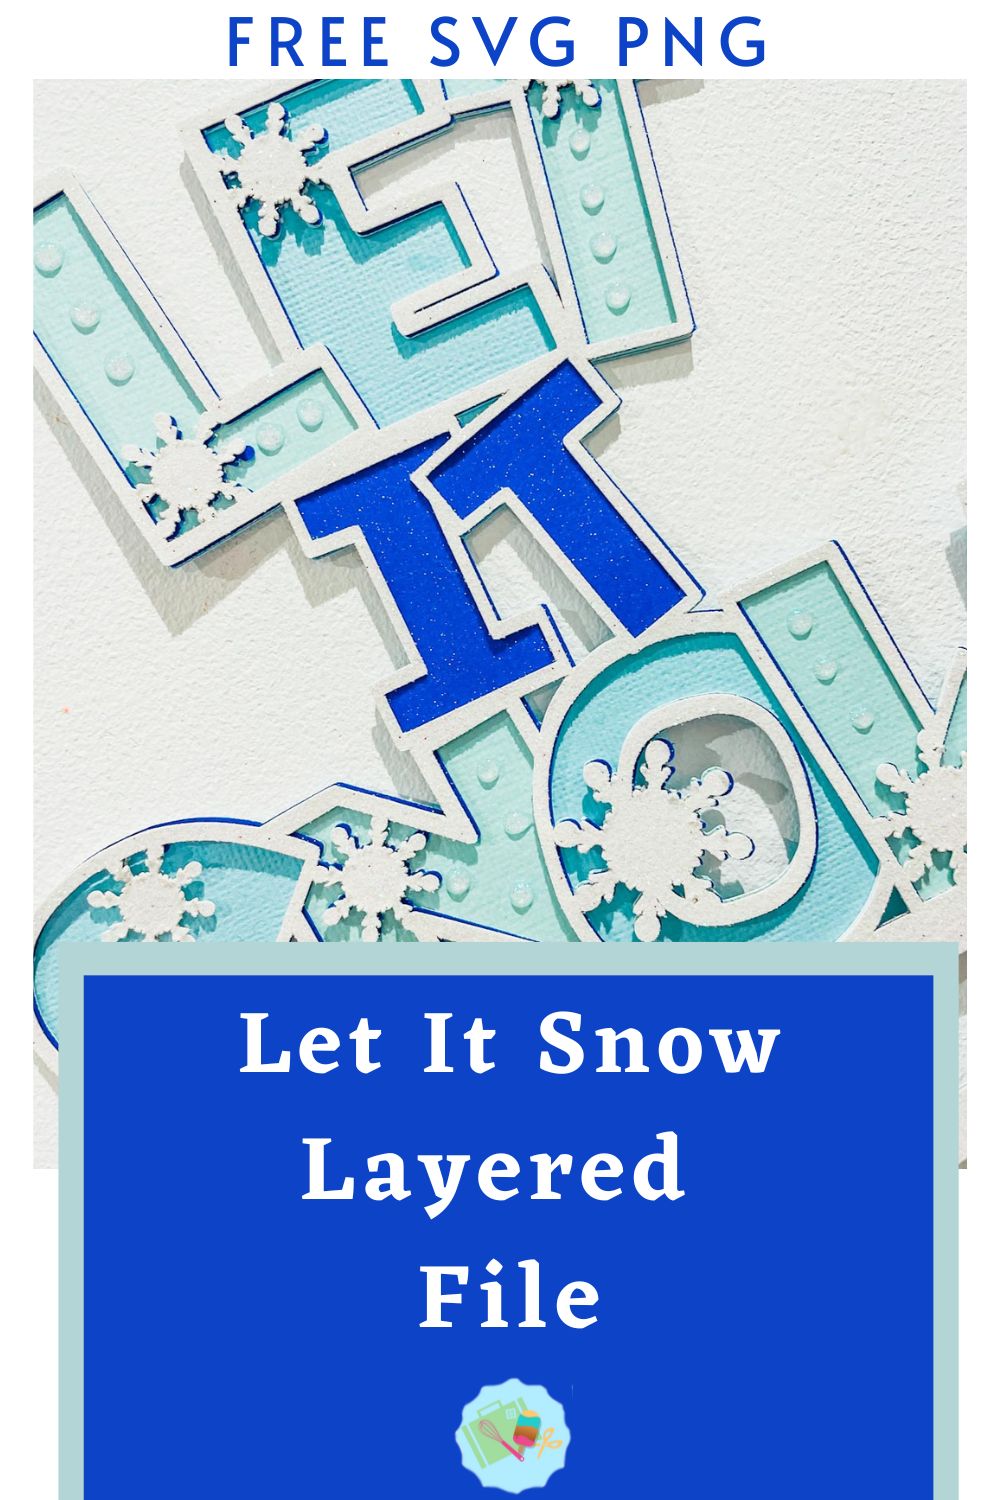 Free let is snow SVG, PNG for Cricut, Glowforge and Silhouette